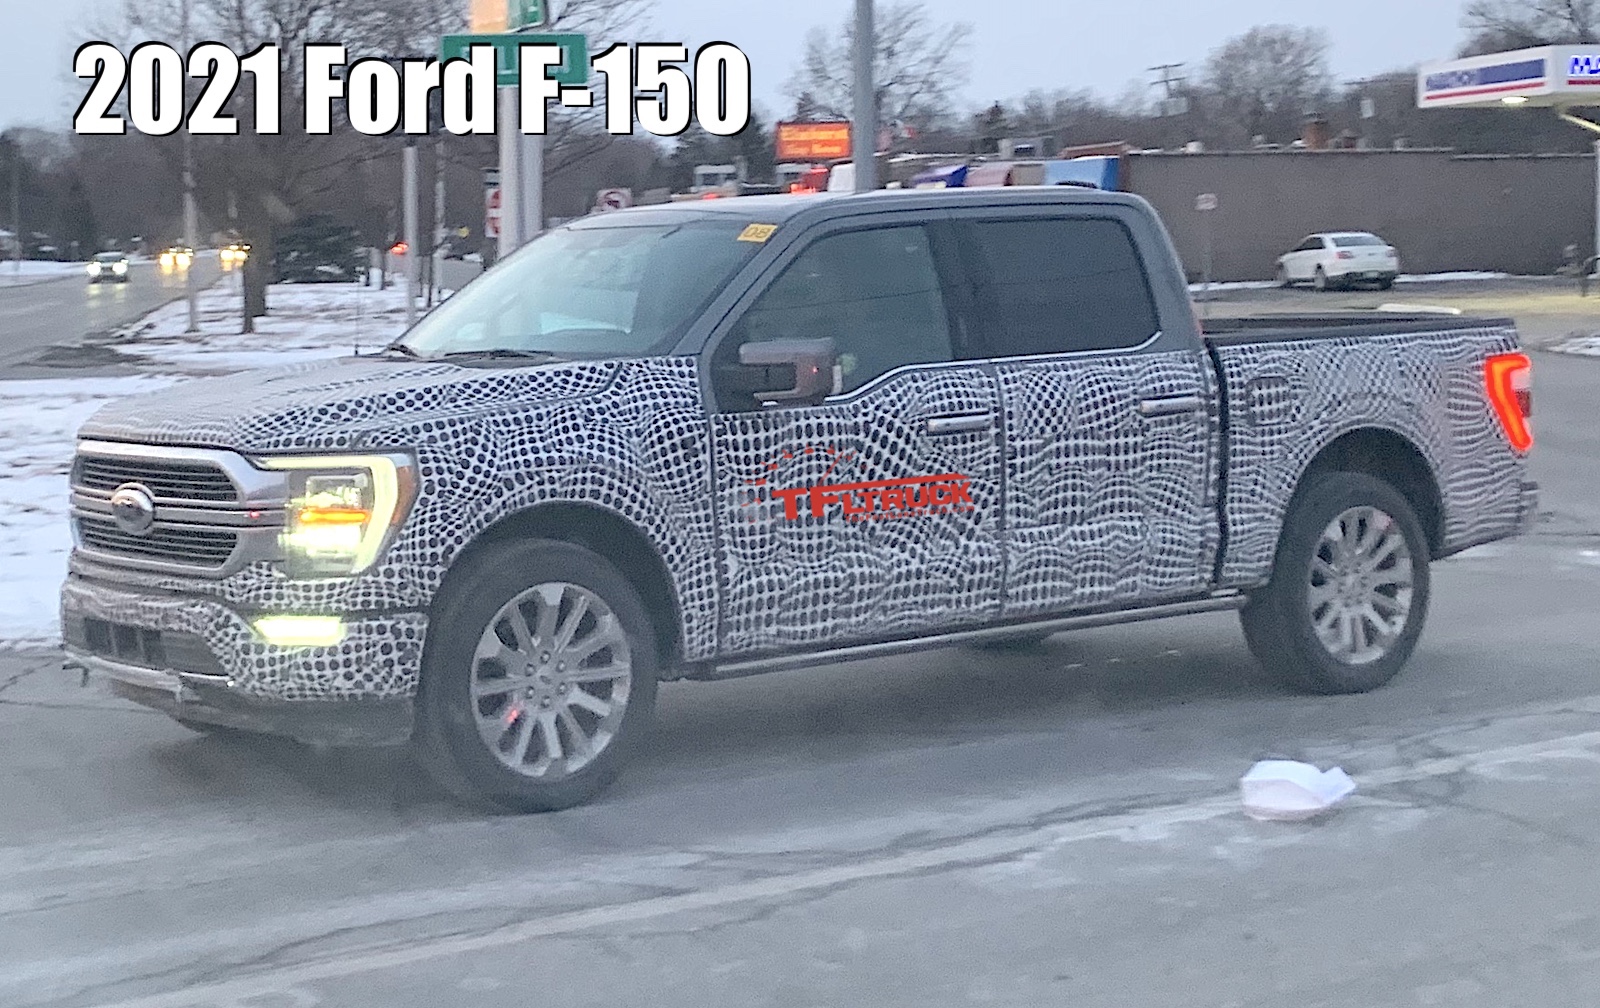 2021 Ford F 150 Prototype Caught Testing With All Led Lights